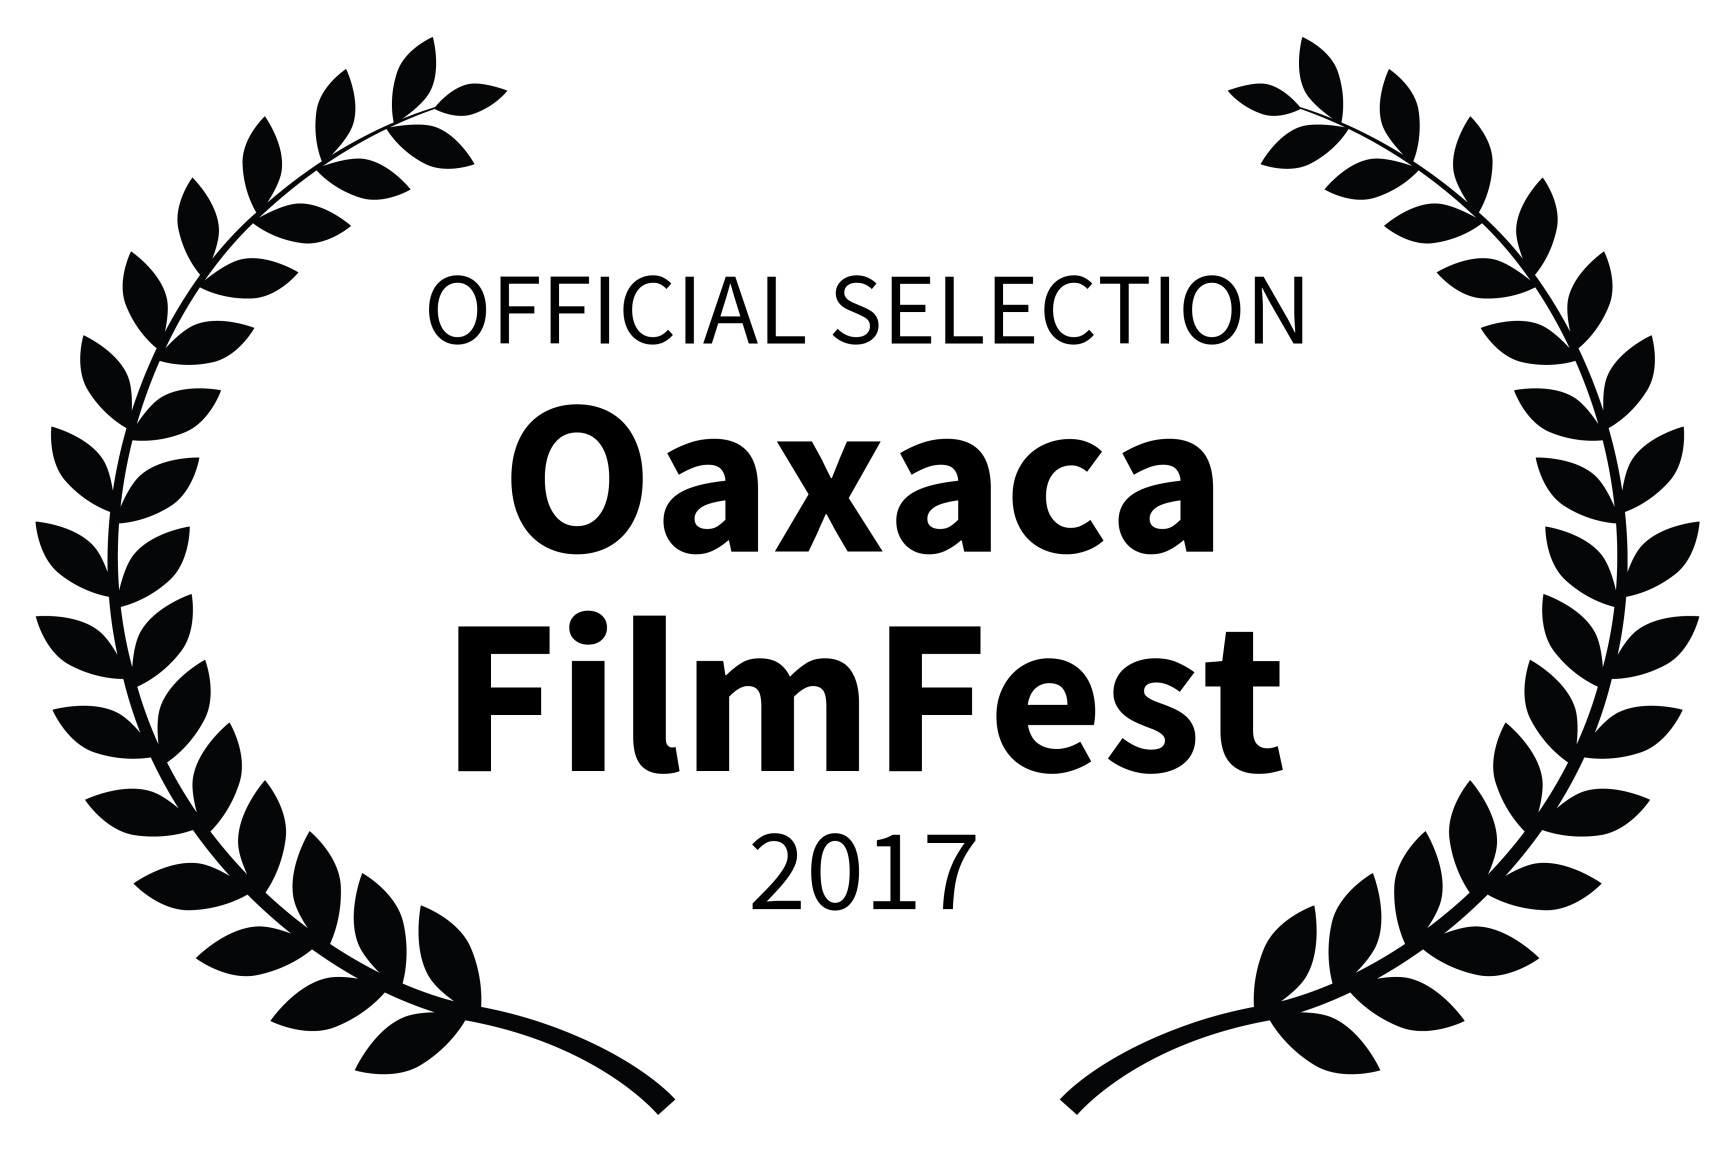 Official_Selection_OaxacaFilmFest2017